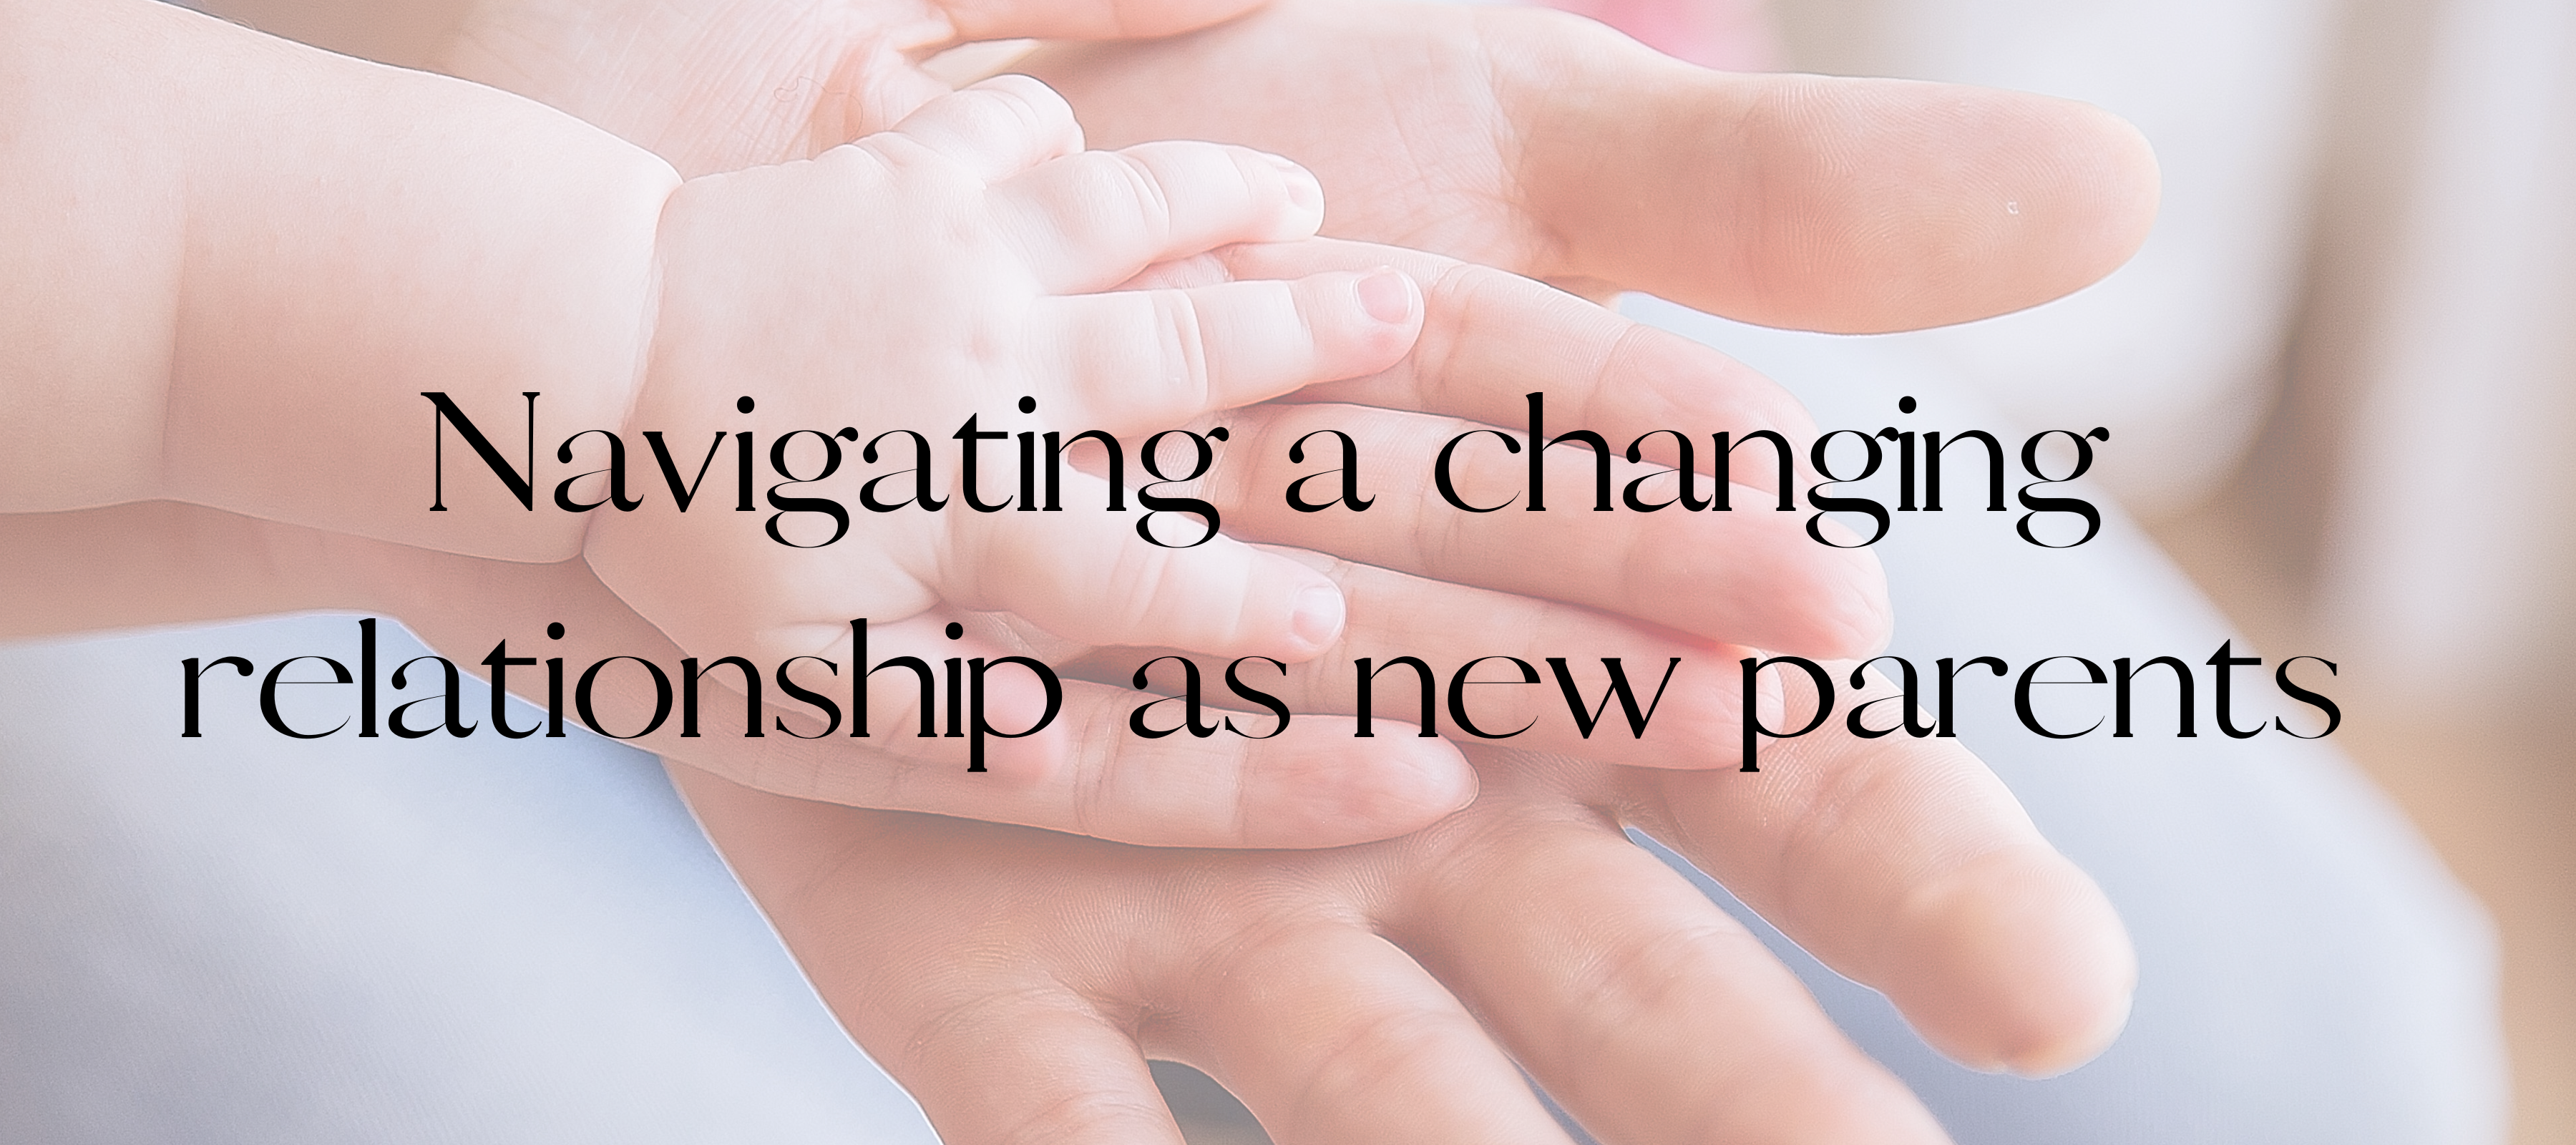 Navigating a changing relationship as new parents